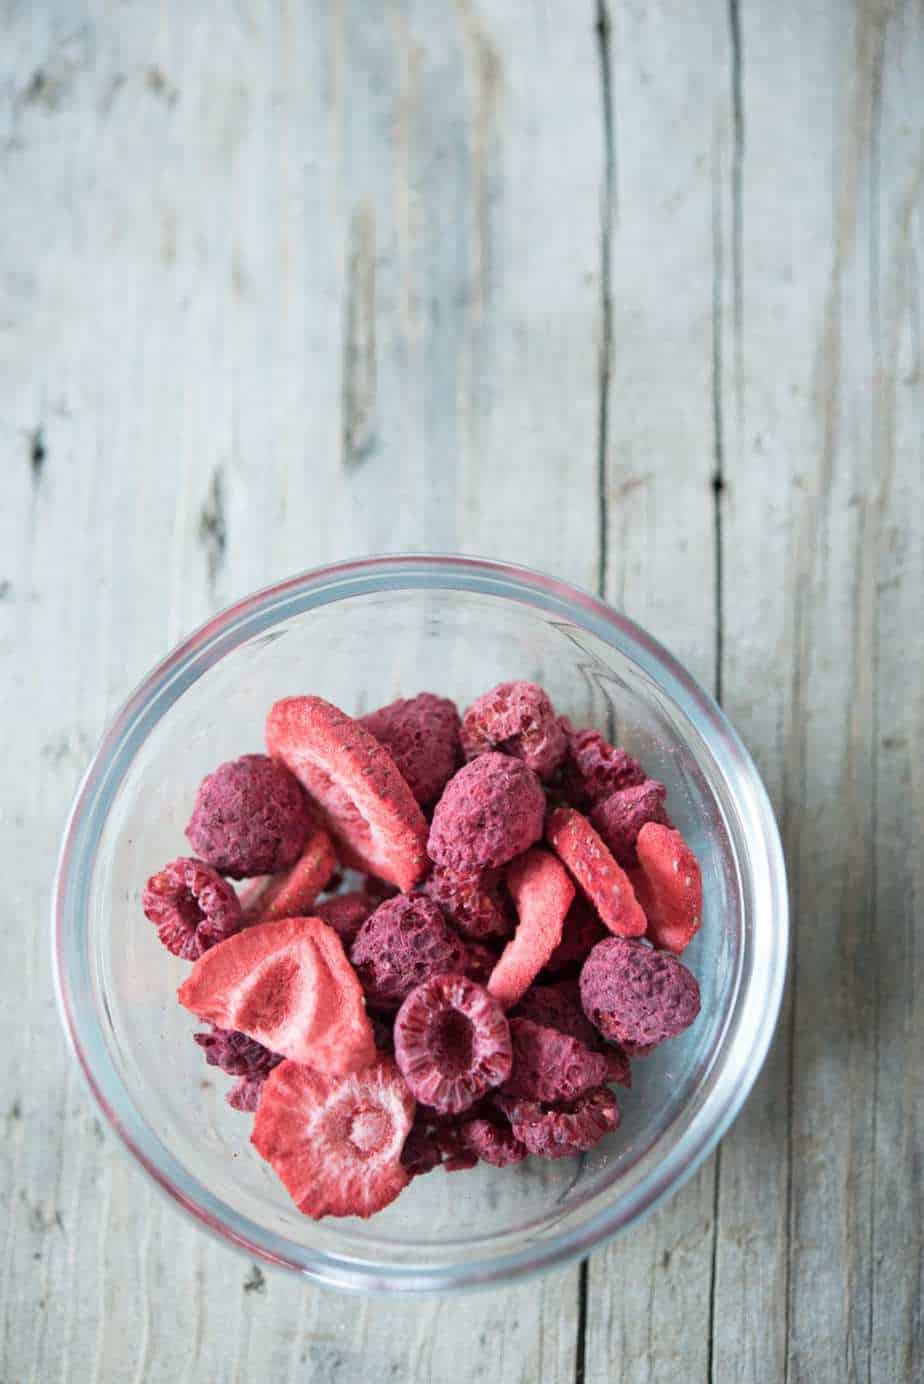 Freeze Dried Strawberries - used for a DIY Lip balm flavored and tinted with freeze dried fruits